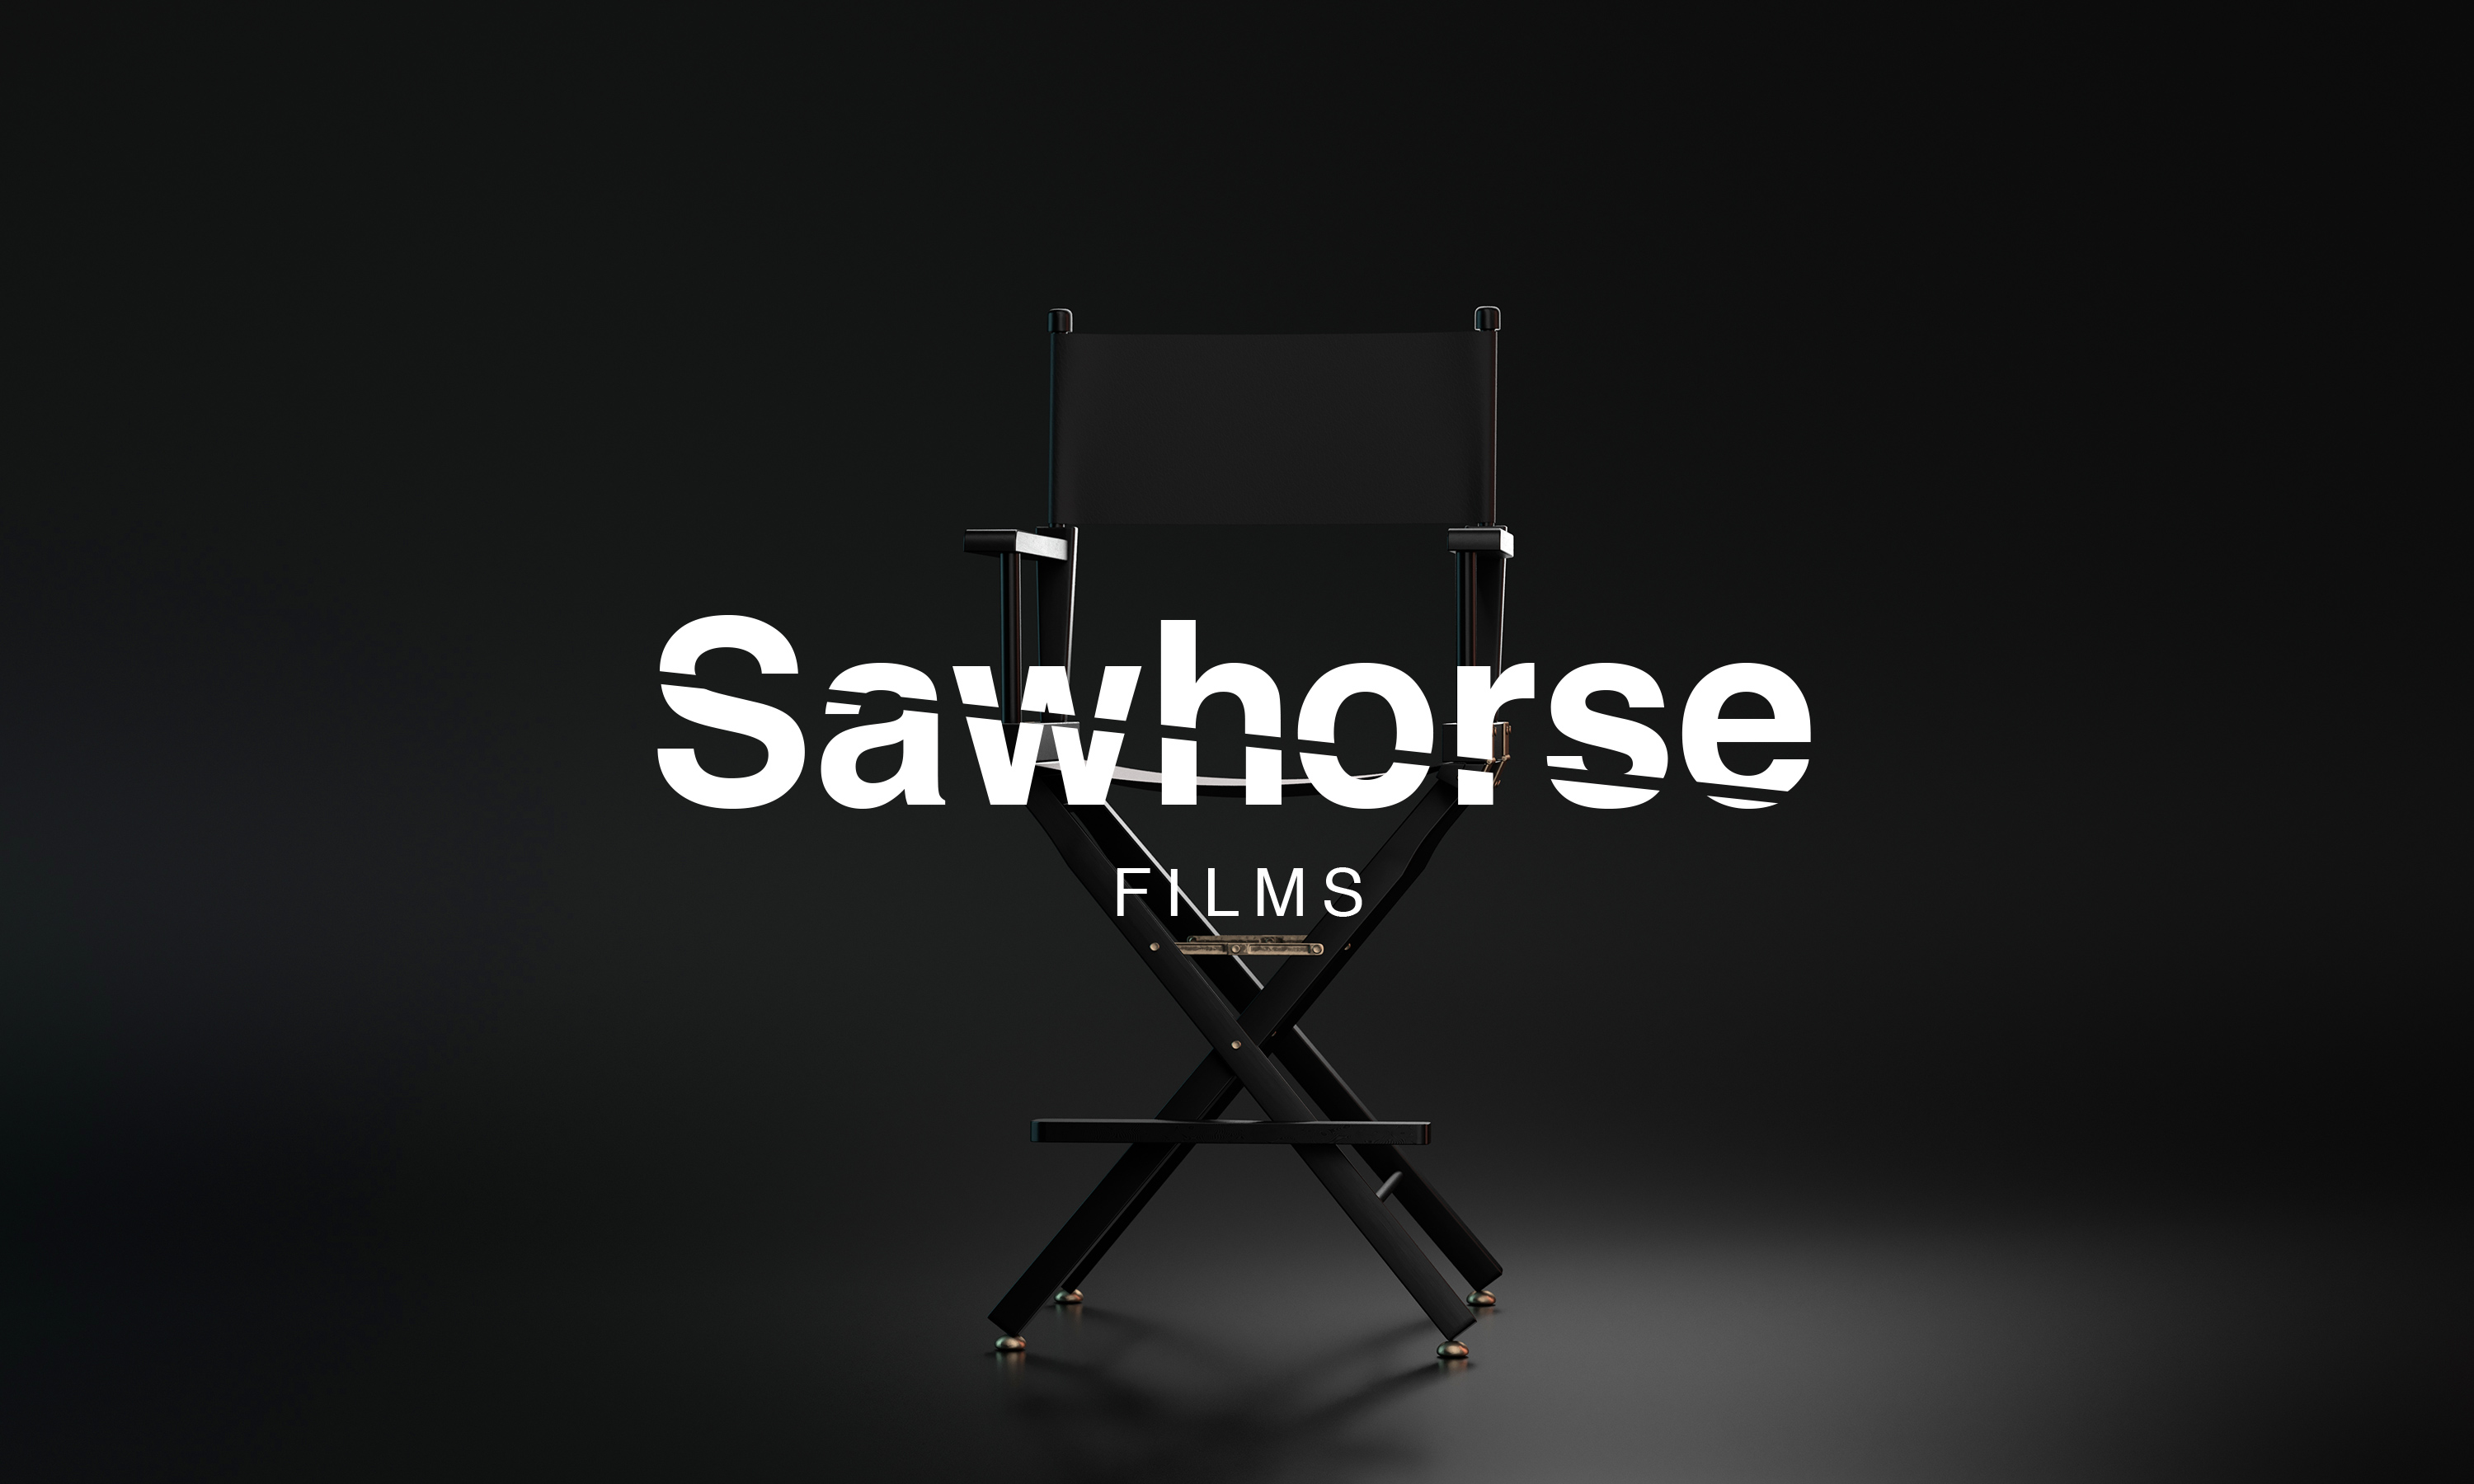 Naming and branding by Neon Sawhorse Films logo designed by Dana Robertson